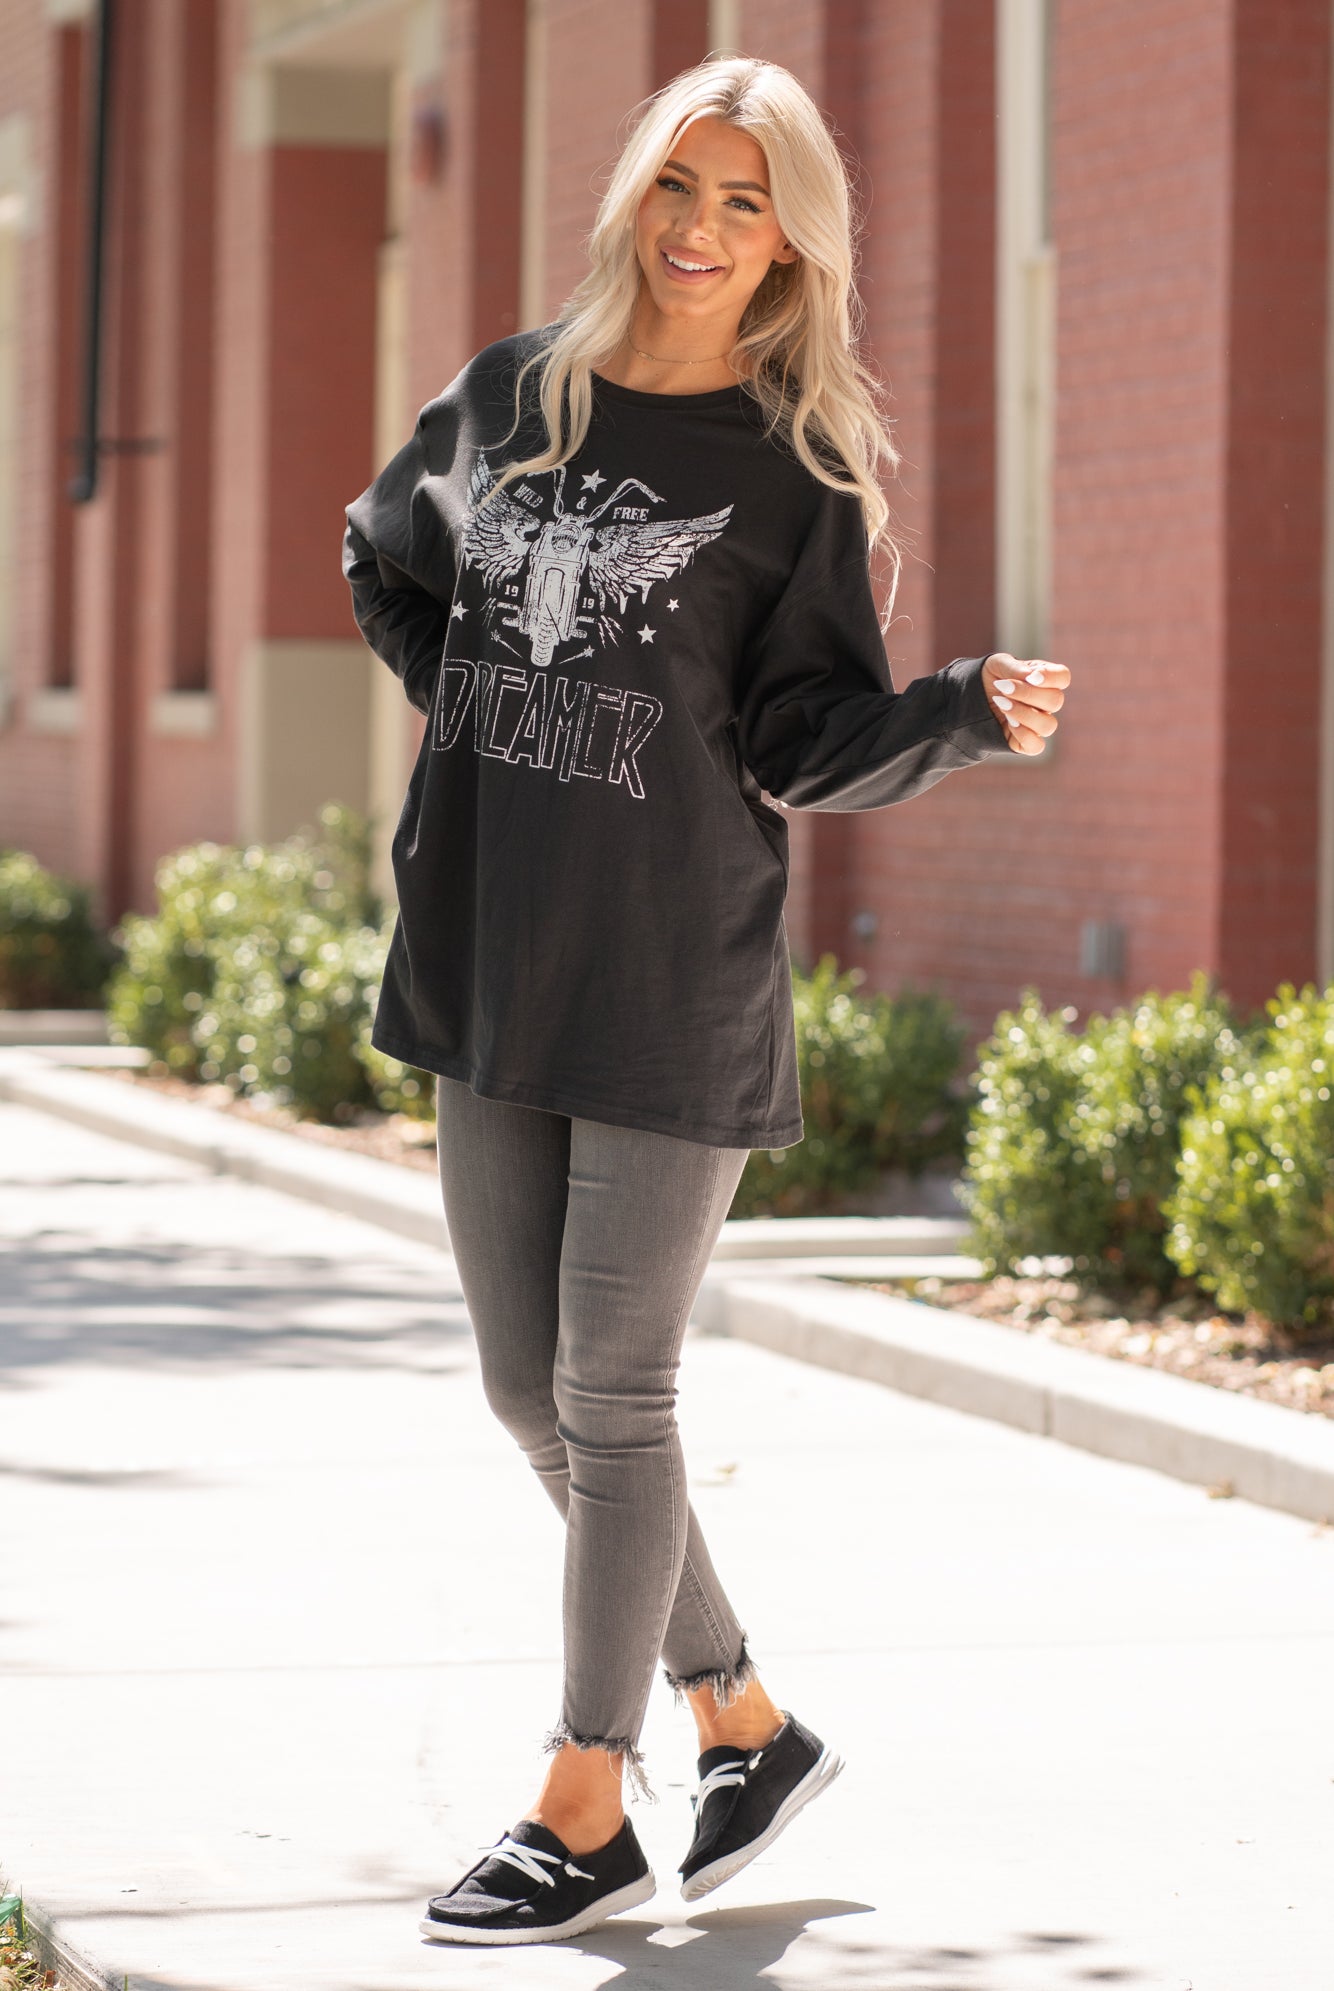 Zutter  Color: Black Neckline: Round Sleeve: Long Sleeve Oversized, Washed Material: COTTON 100%  Style #: F550-8047 Contact us for any additional measurements or sizing.  